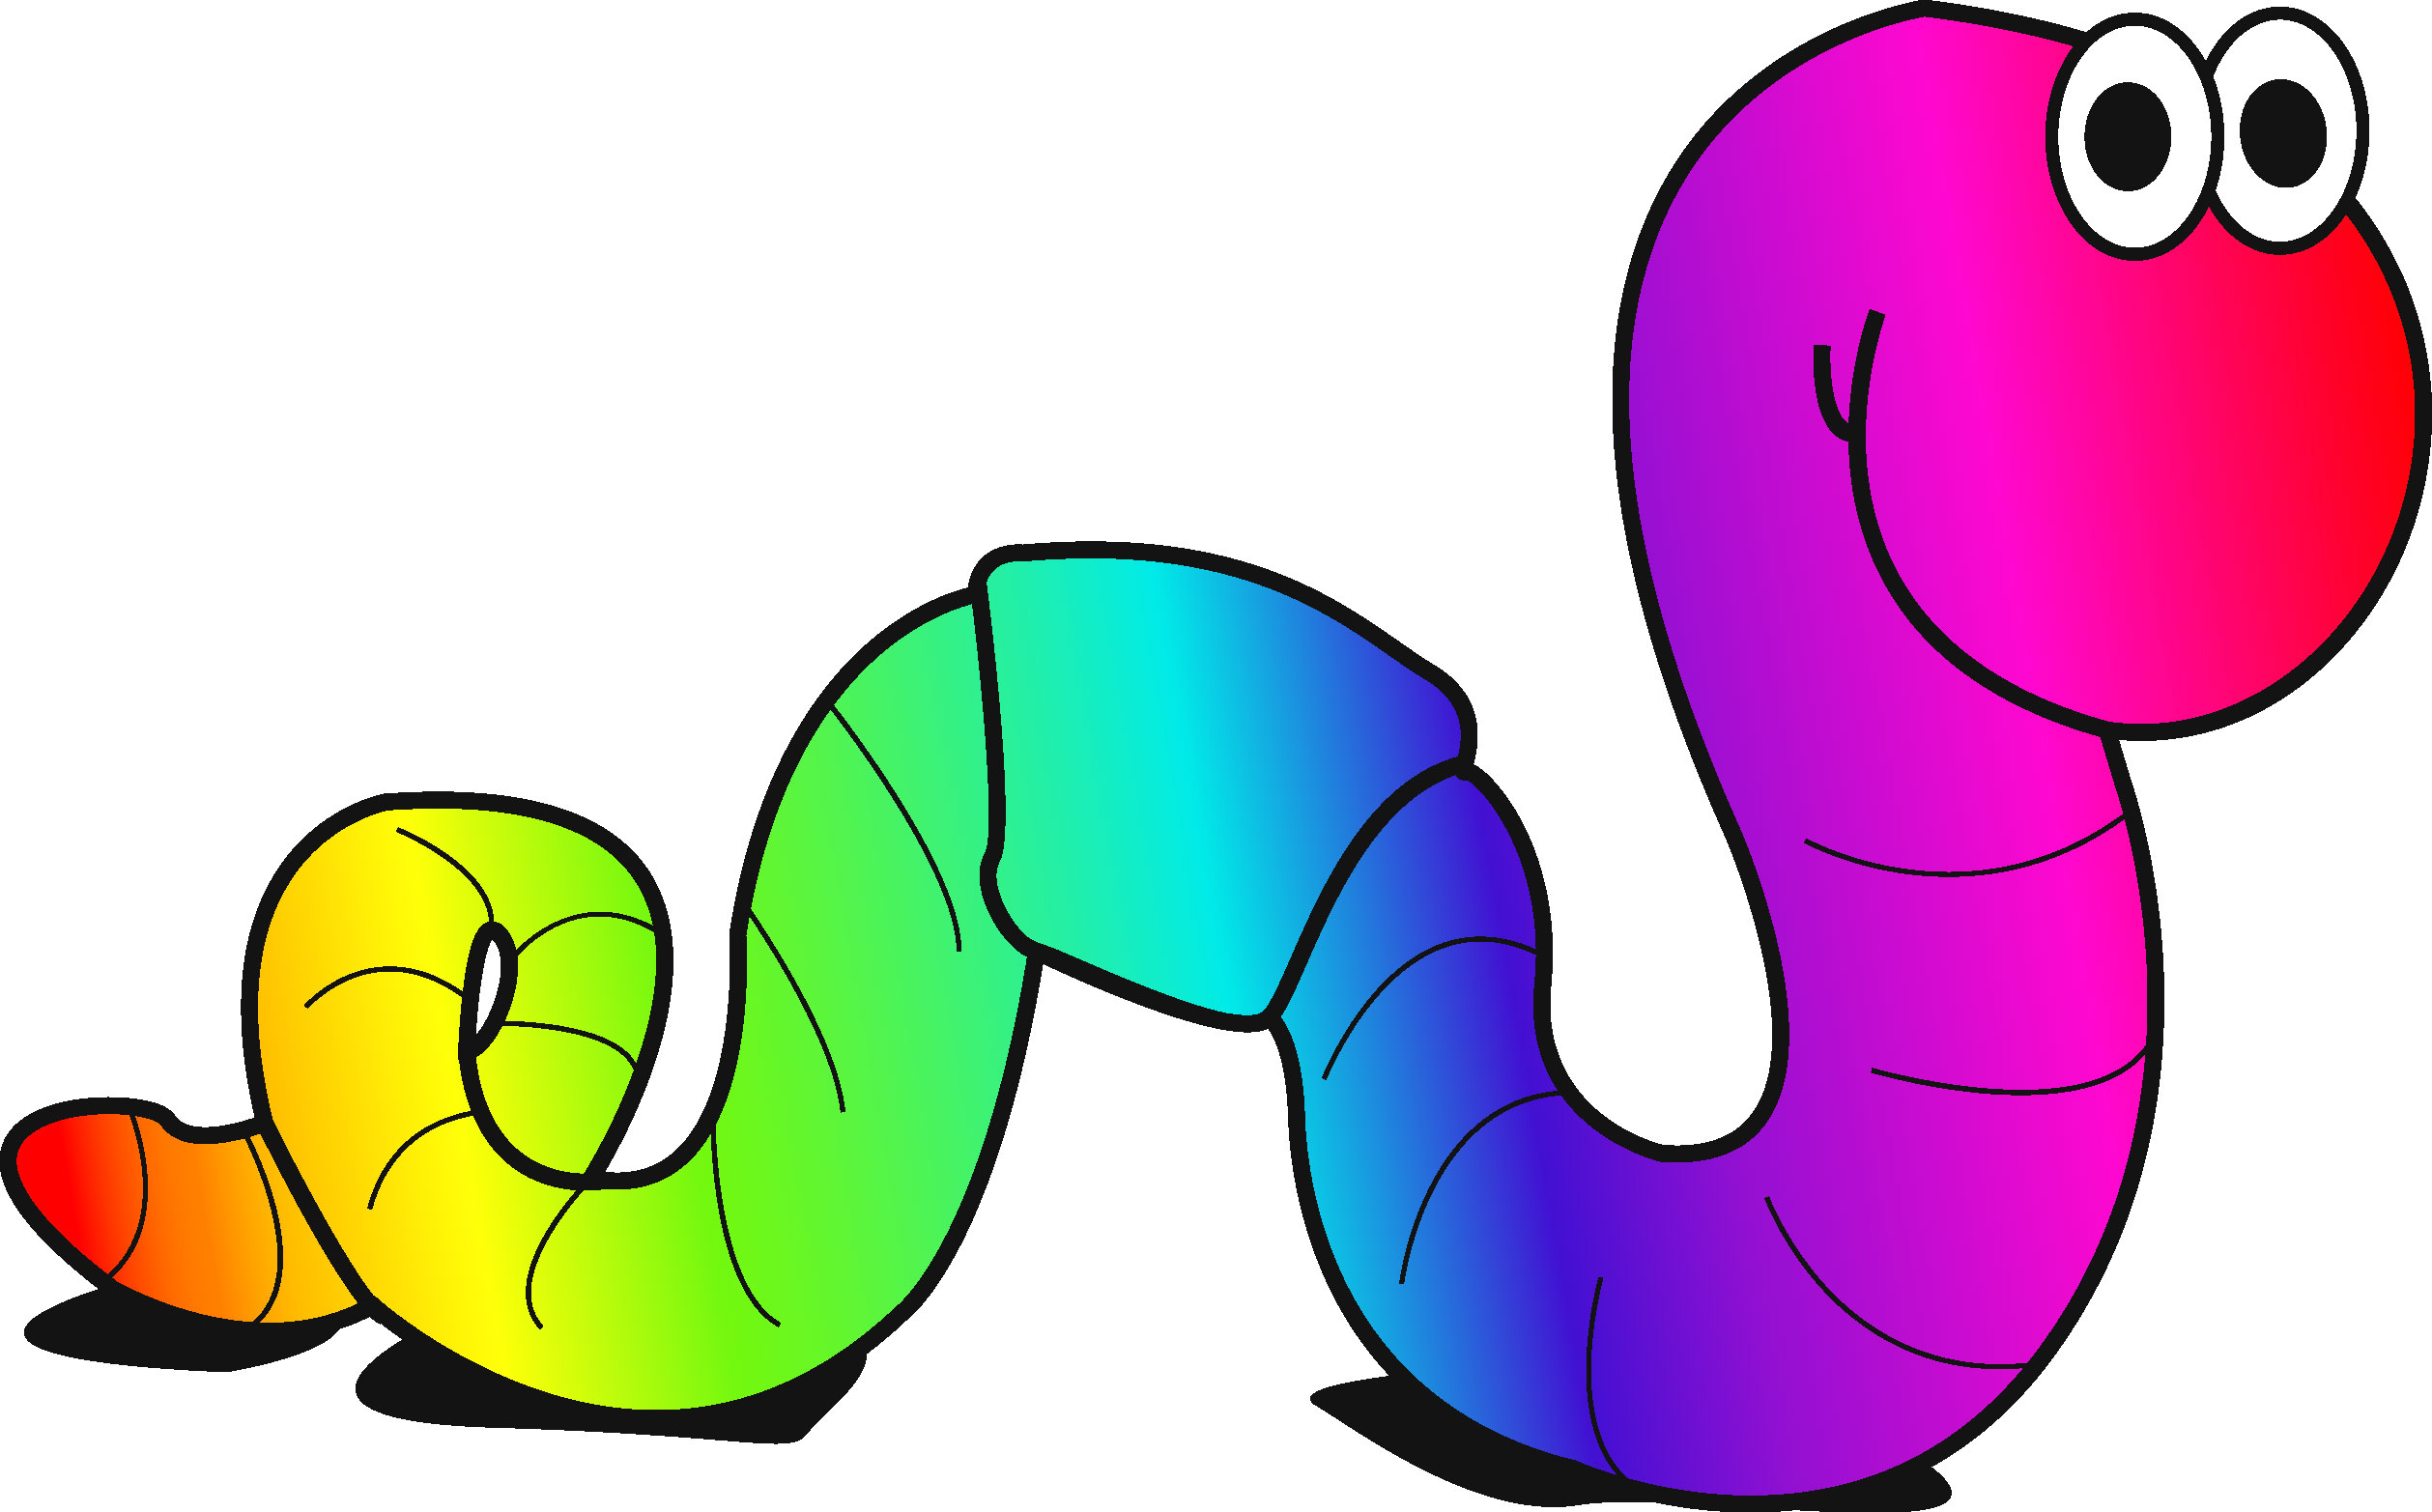 Free Wiggle Worm Cliparts, Download Free Clip Art, Free Clip Art on.